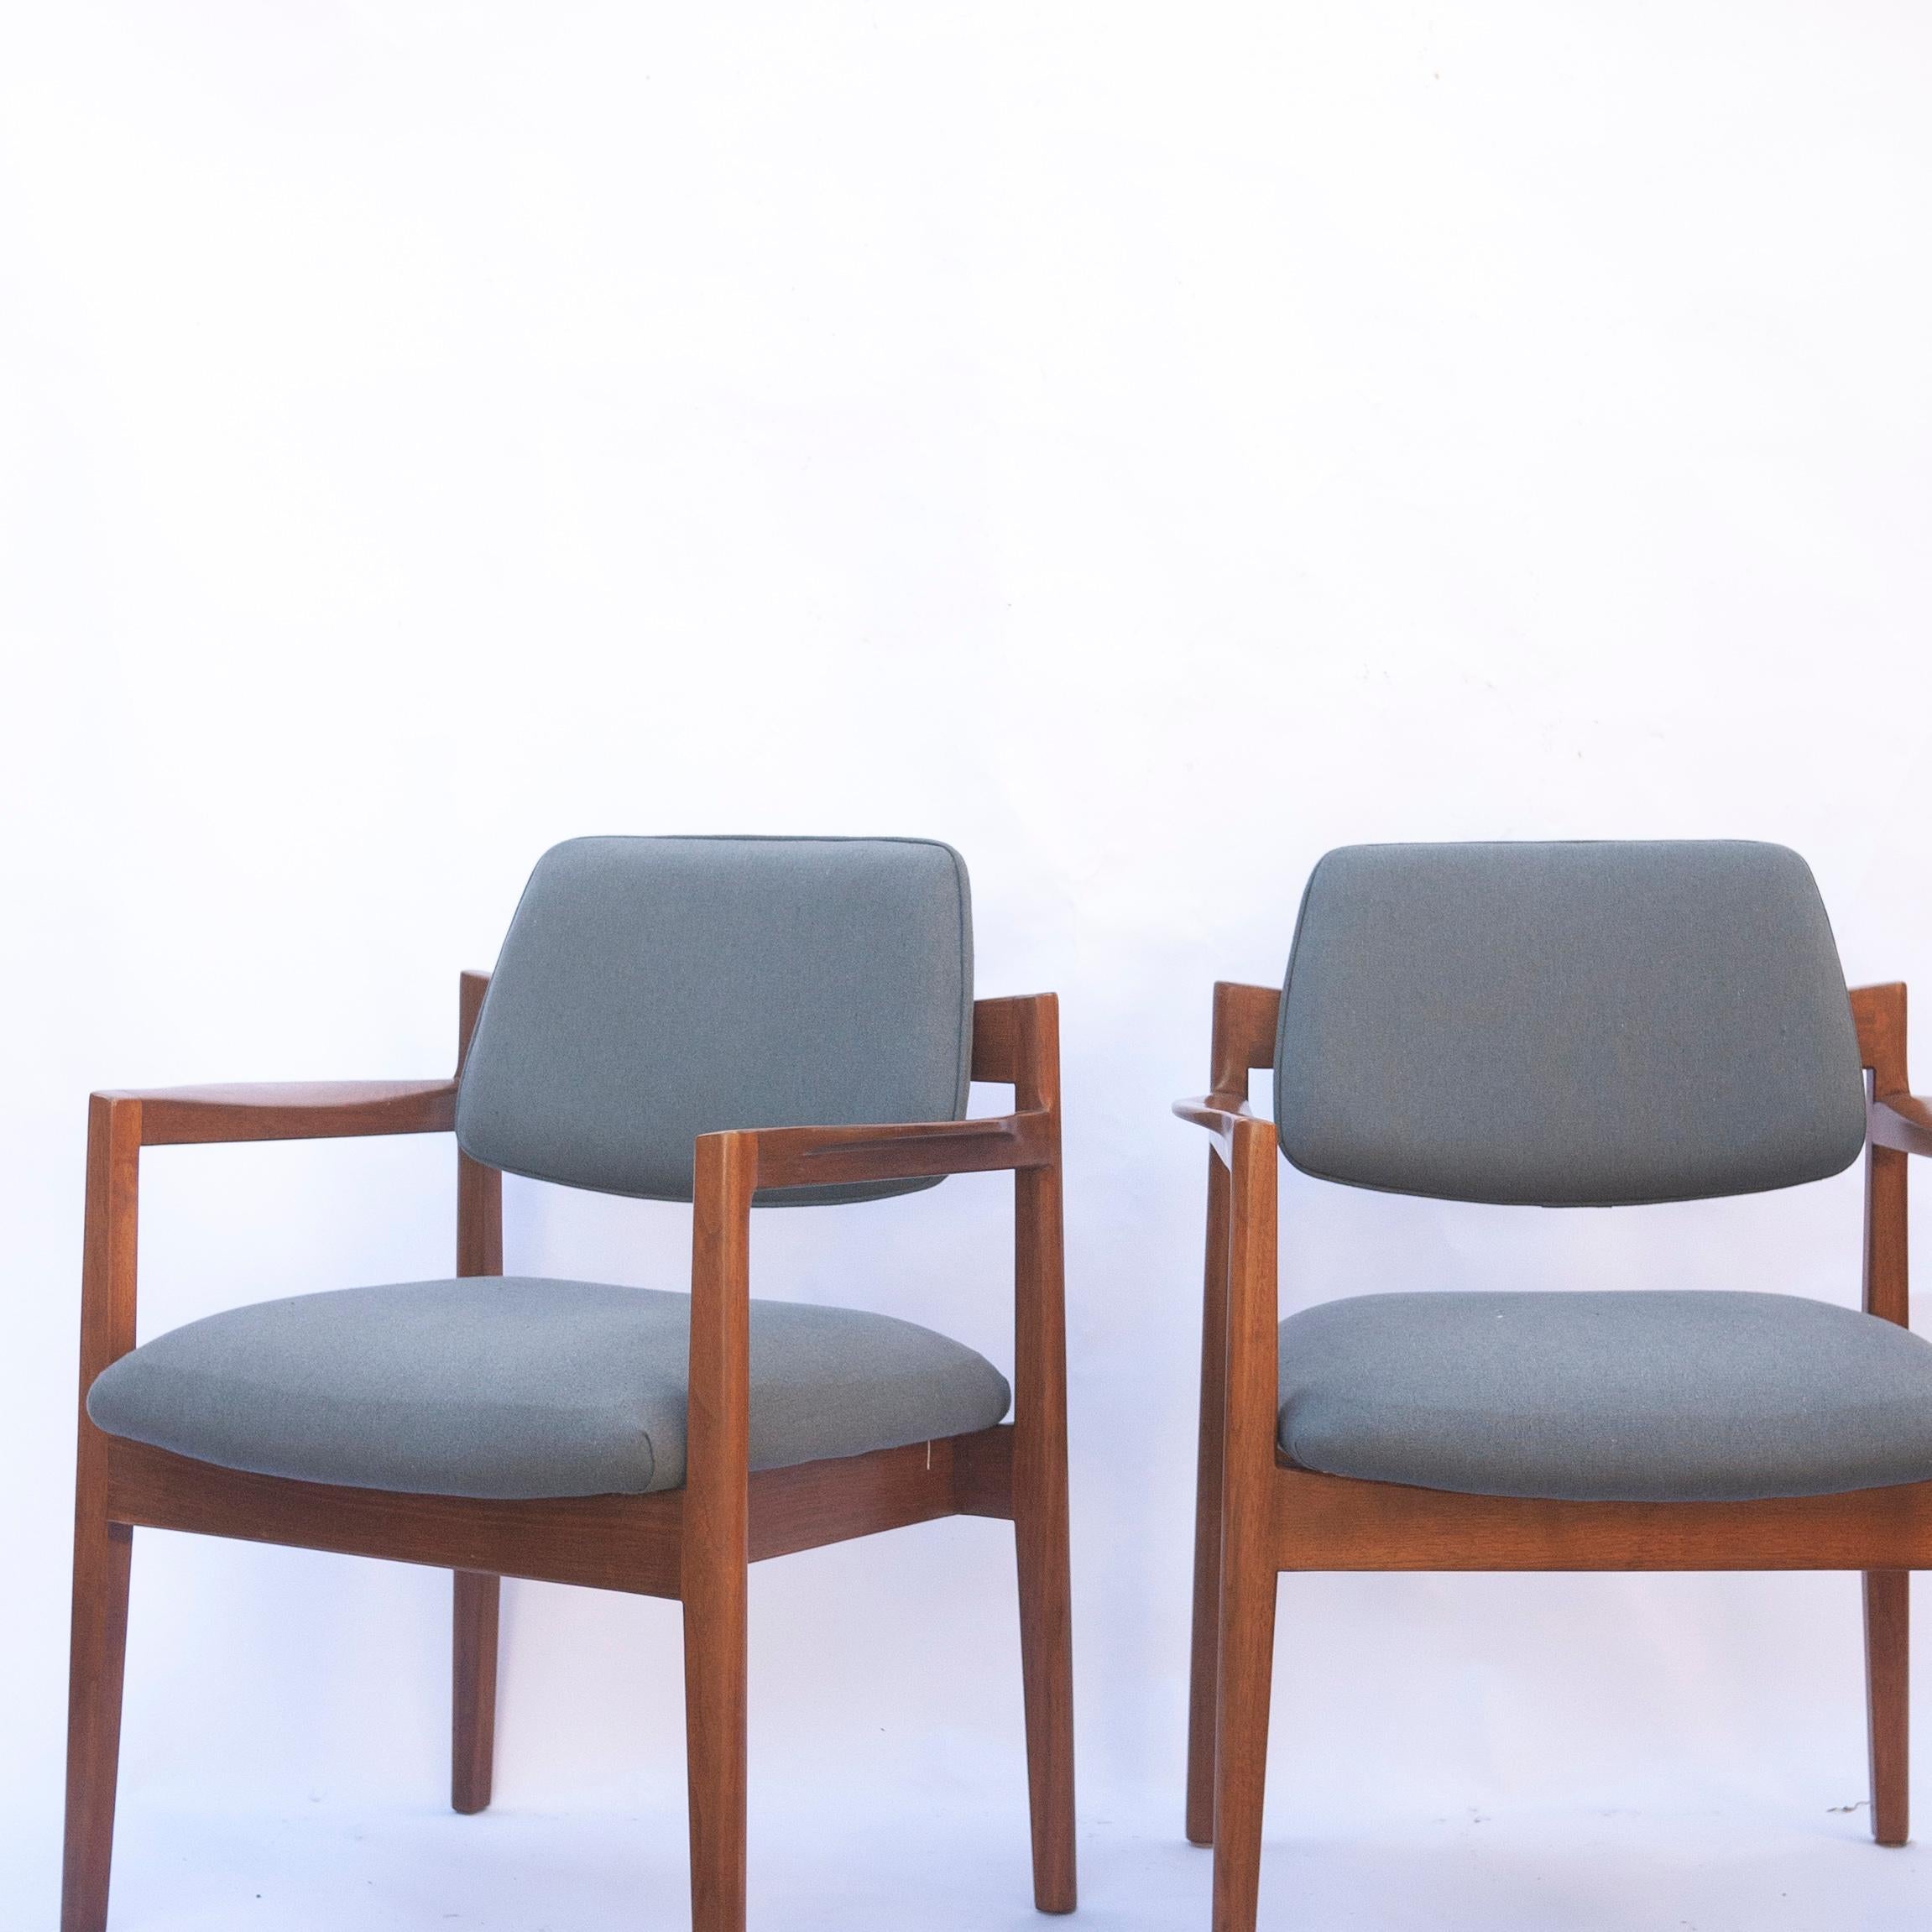 Mid-20th Century Pair of Arm Chairs by Jens Risom for Knoll in Walnut and Newly Upholstered  For Sale